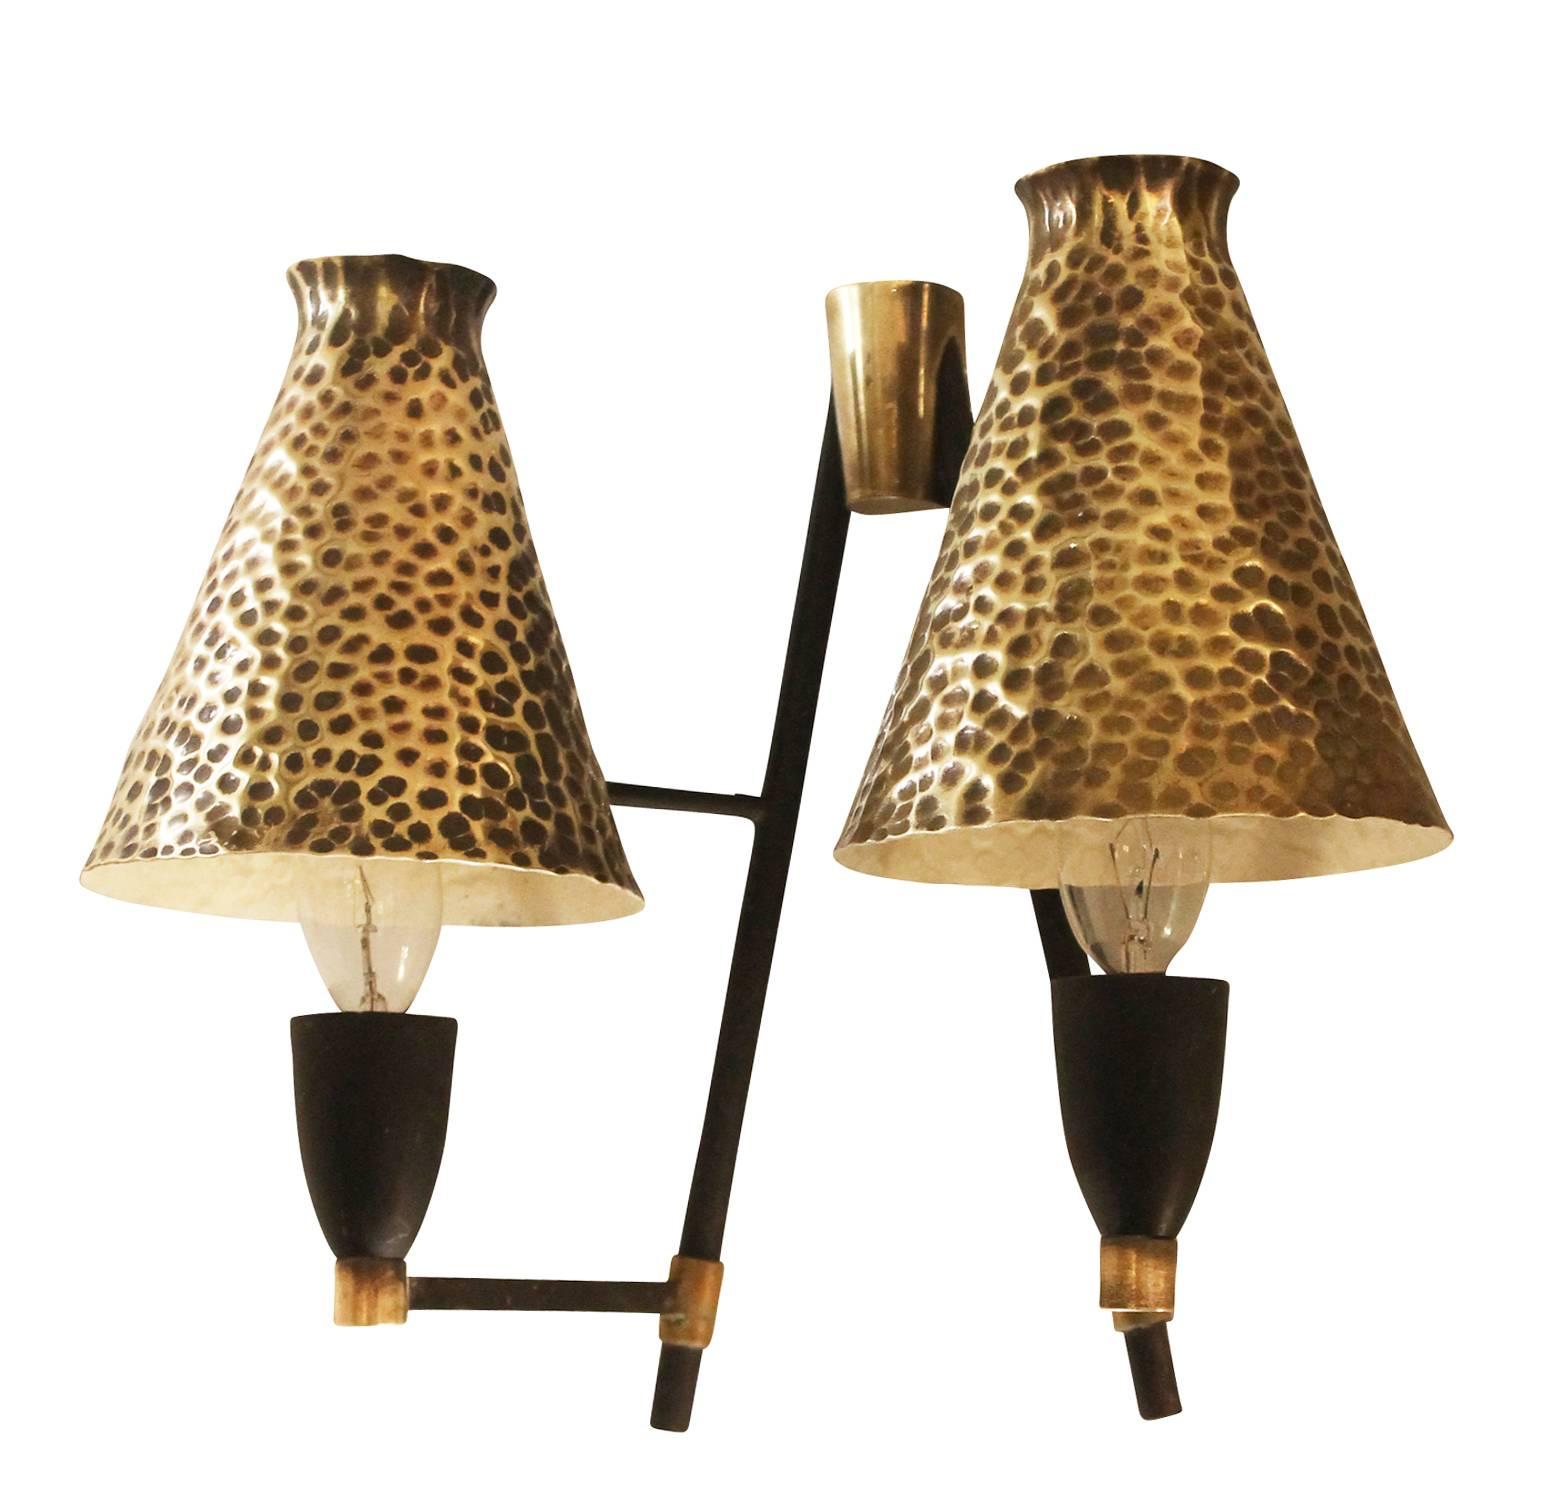 Pair of unusual Mid-Century wall lights with hammered brass shades. Frame is black and brass. Each holds two candelabra sockets.
